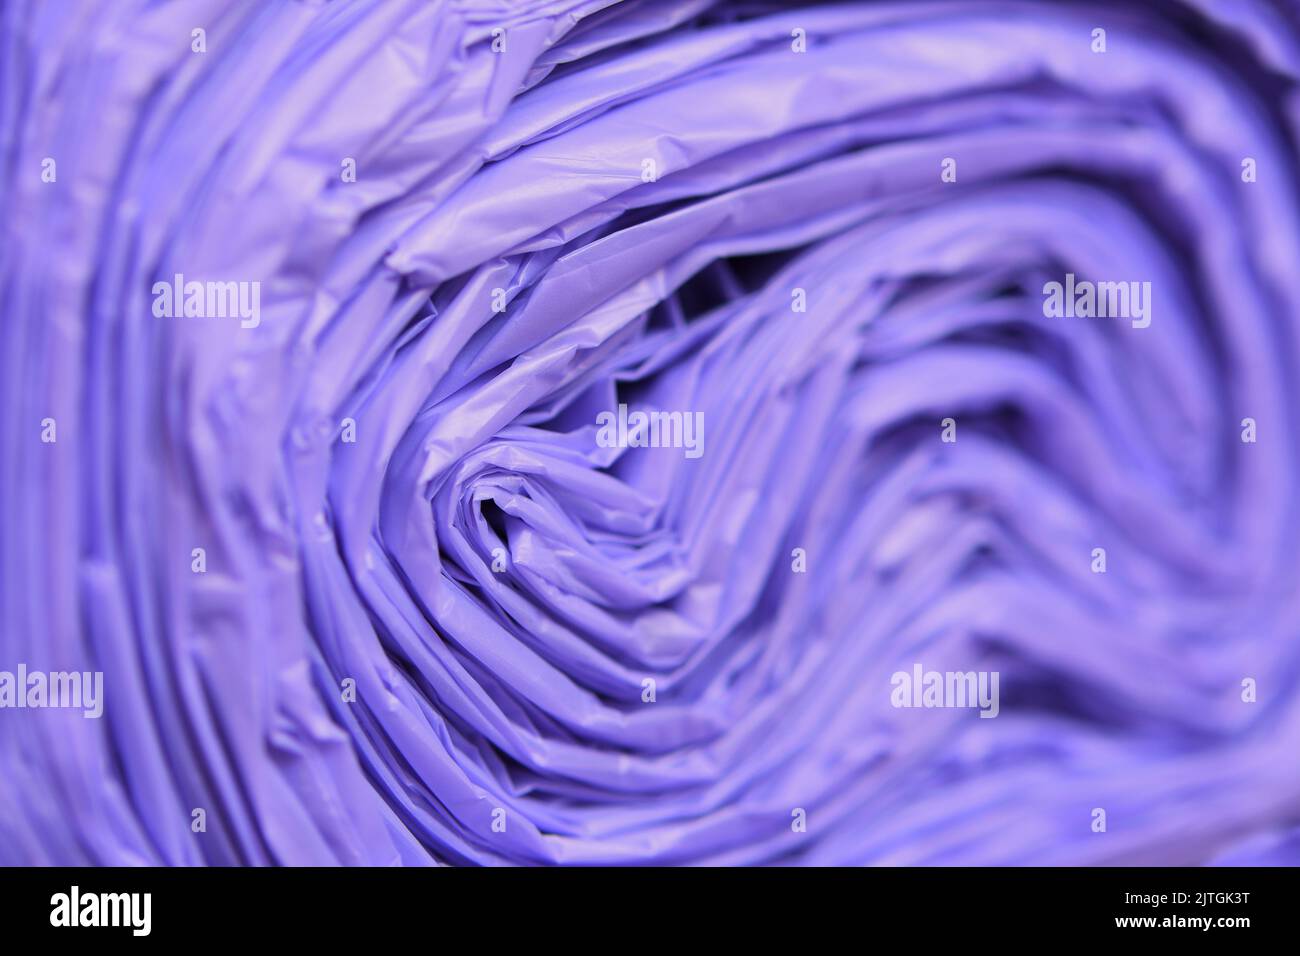 An extreme close-up of the end of a tightly packed roll of non-recyclable purple rubbish/garbage/trash bags Stock Photo